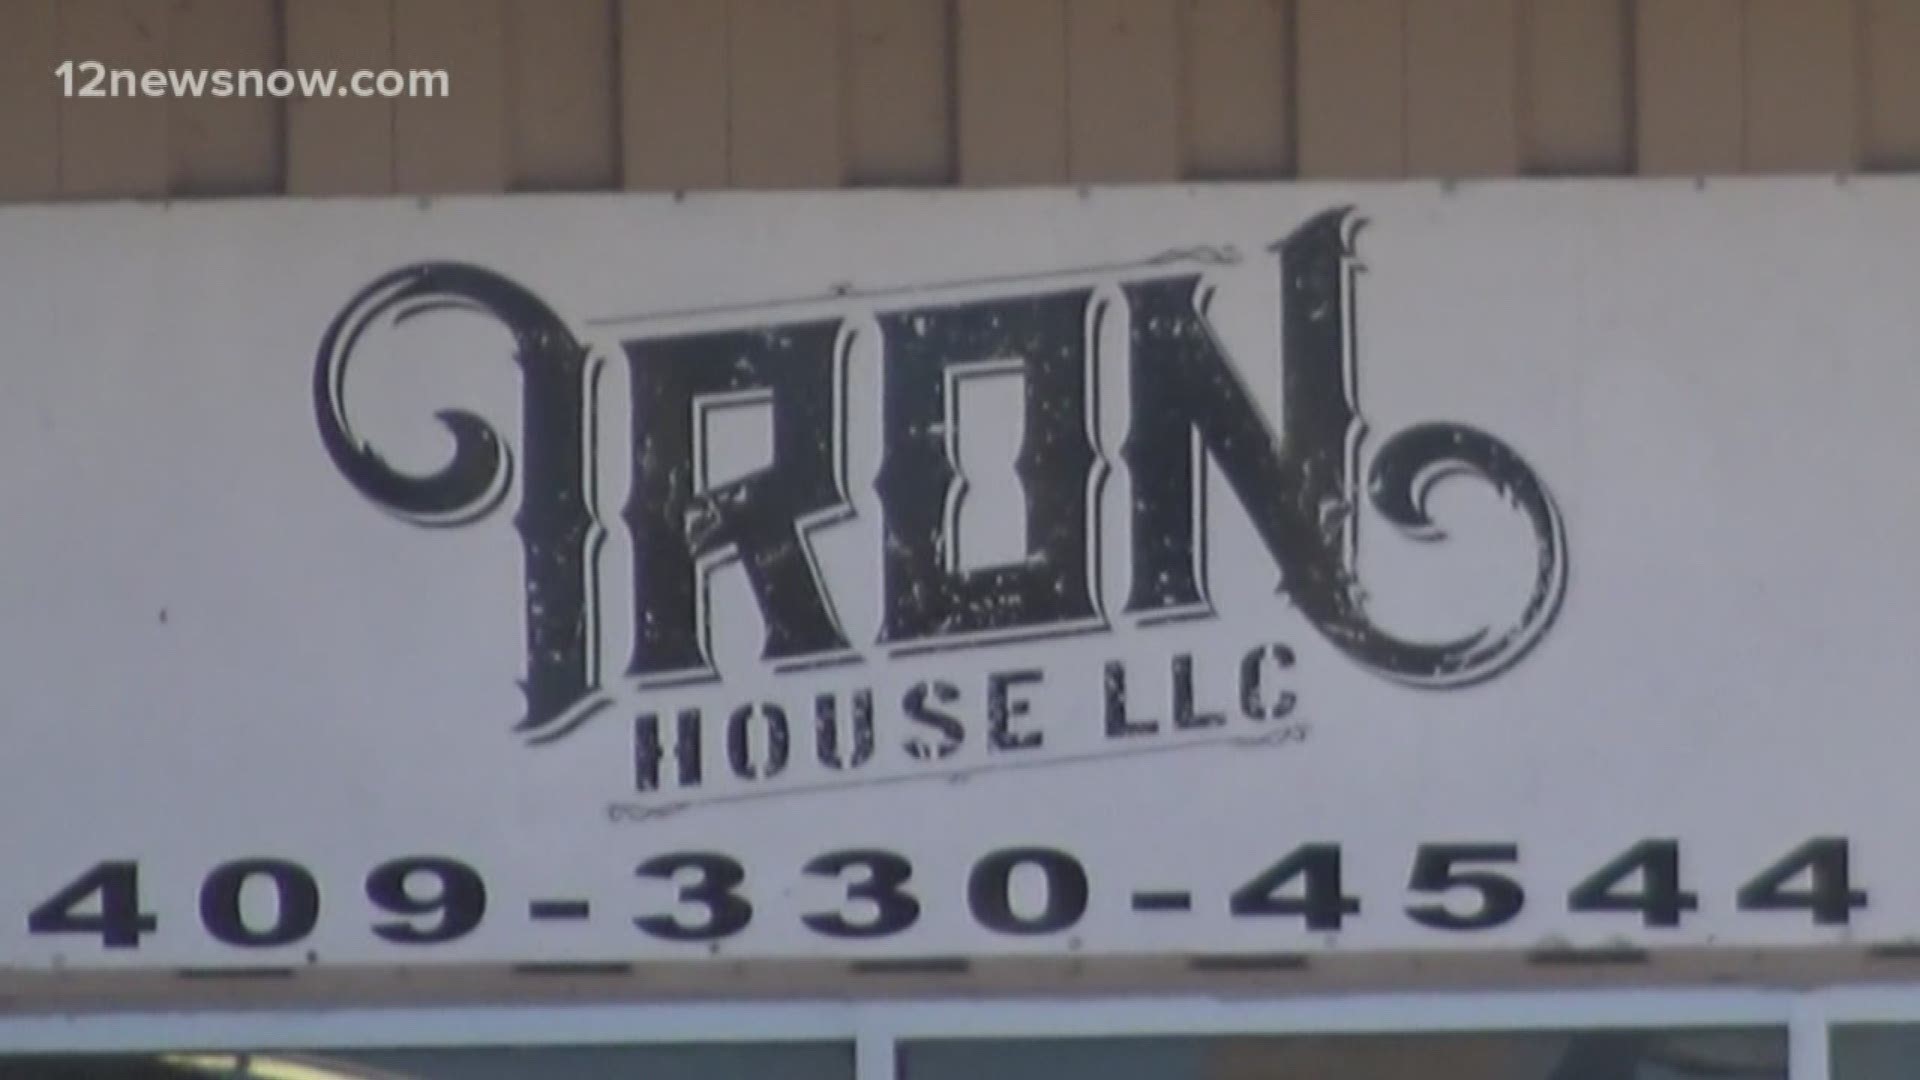 Iron House gym is accused of staying open instead of closing to align with state guidelines